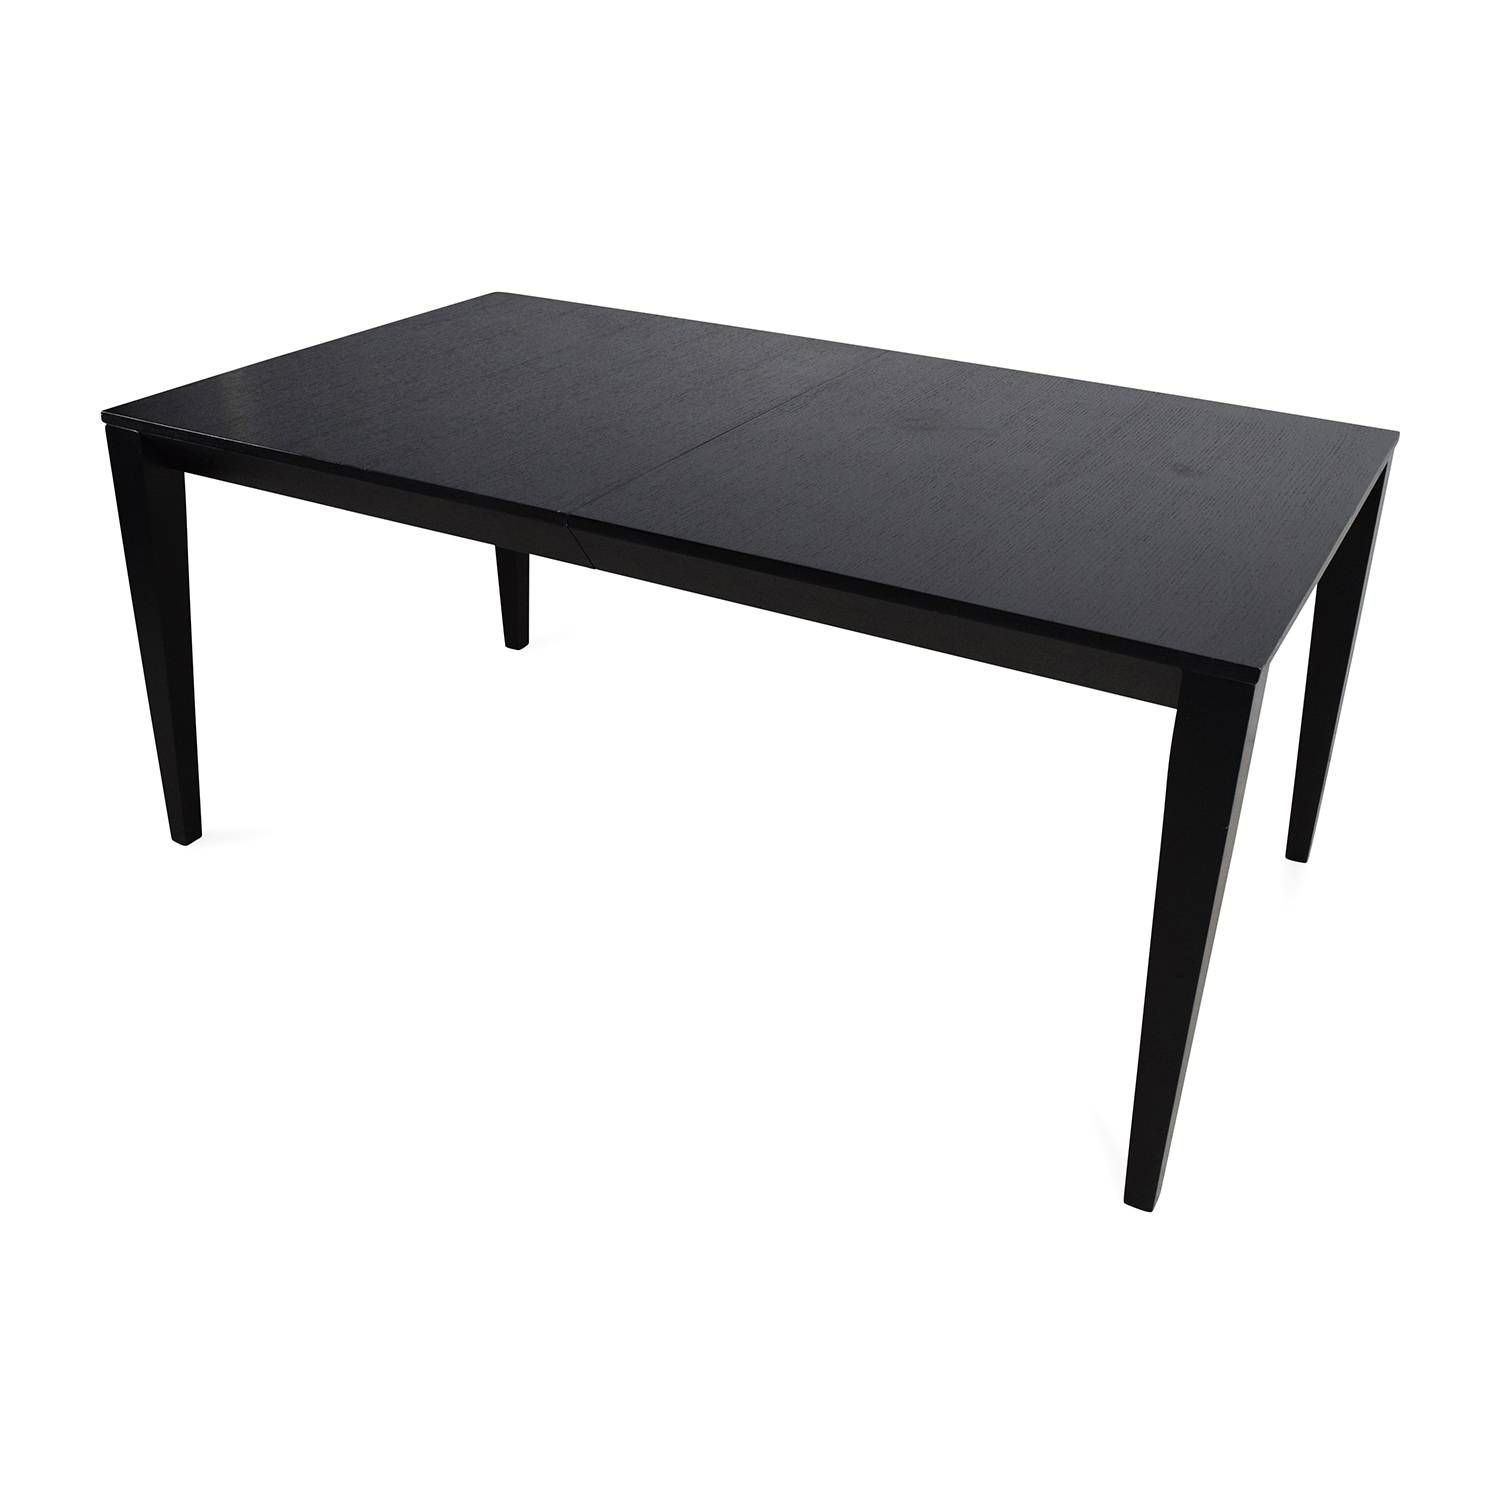 56% Off – Crate And Barrel Crate & Barrel Black Extendable Dining With Regard To Crate And Barrel Sofa Tables (View 15 of 15)